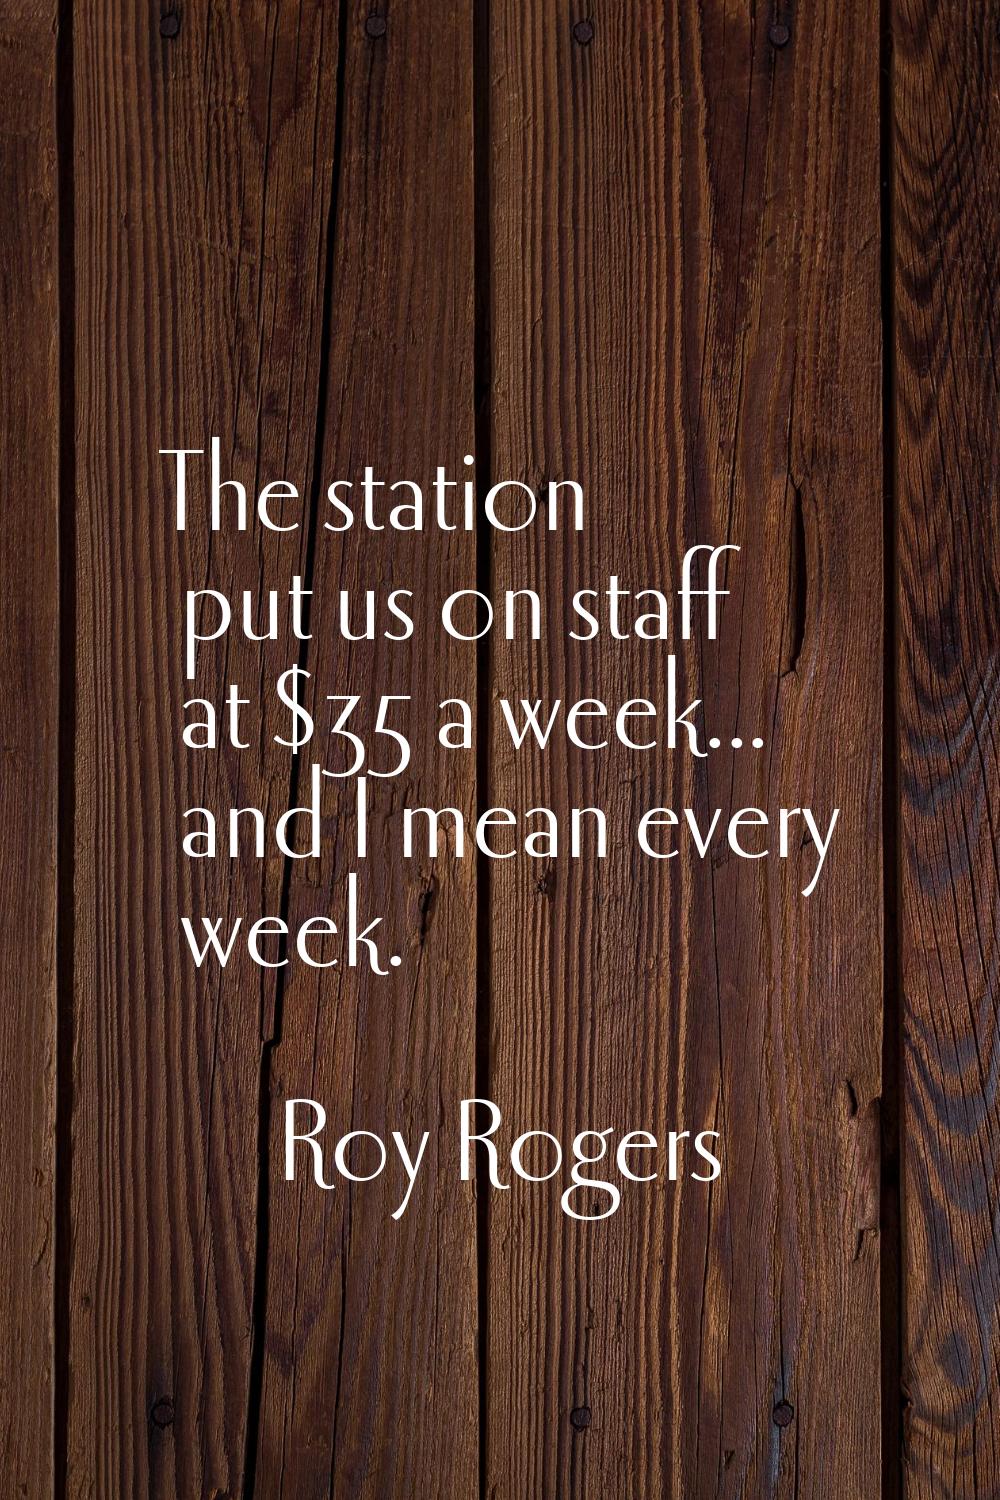 The station put us on staff at $35 a week... and I mean every week.